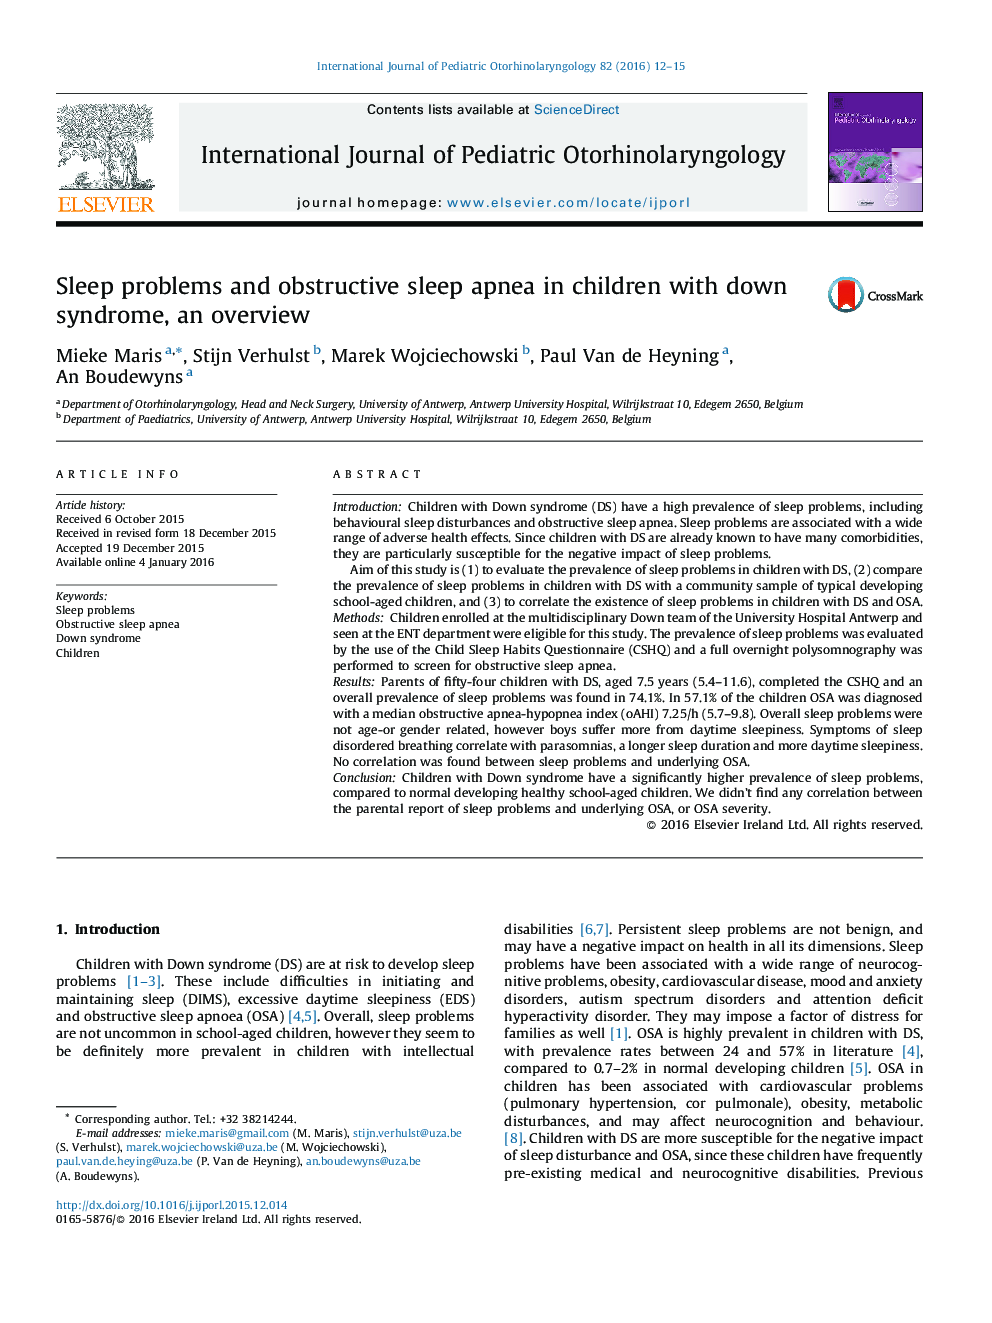 Sleep problems and obstructive sleep apnea in children with down syndrome, an overview